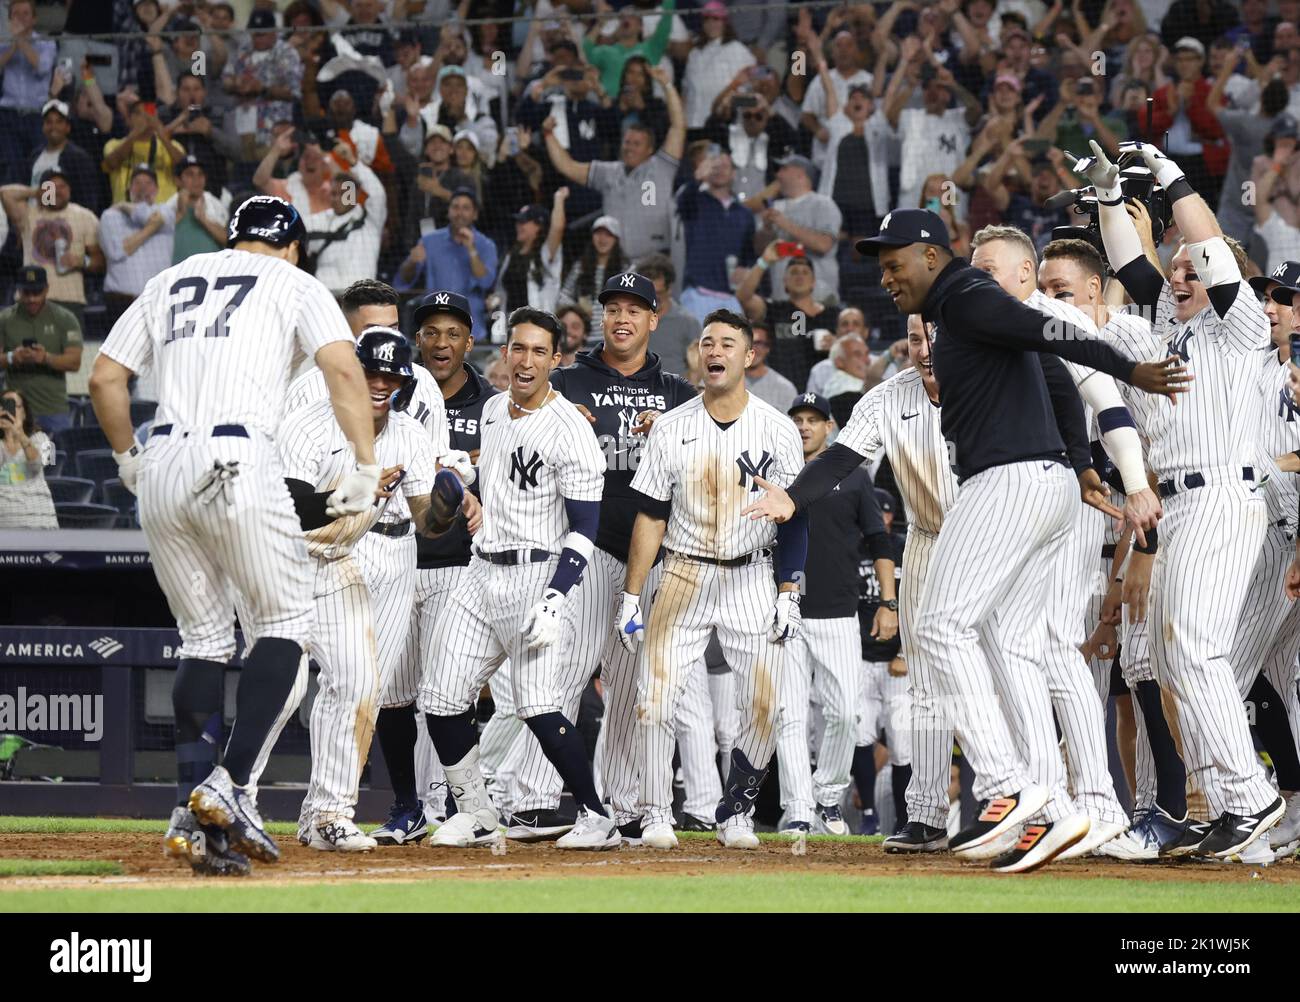 The New York Yankees celebrate after Giancarlo Stanton (27) hit a